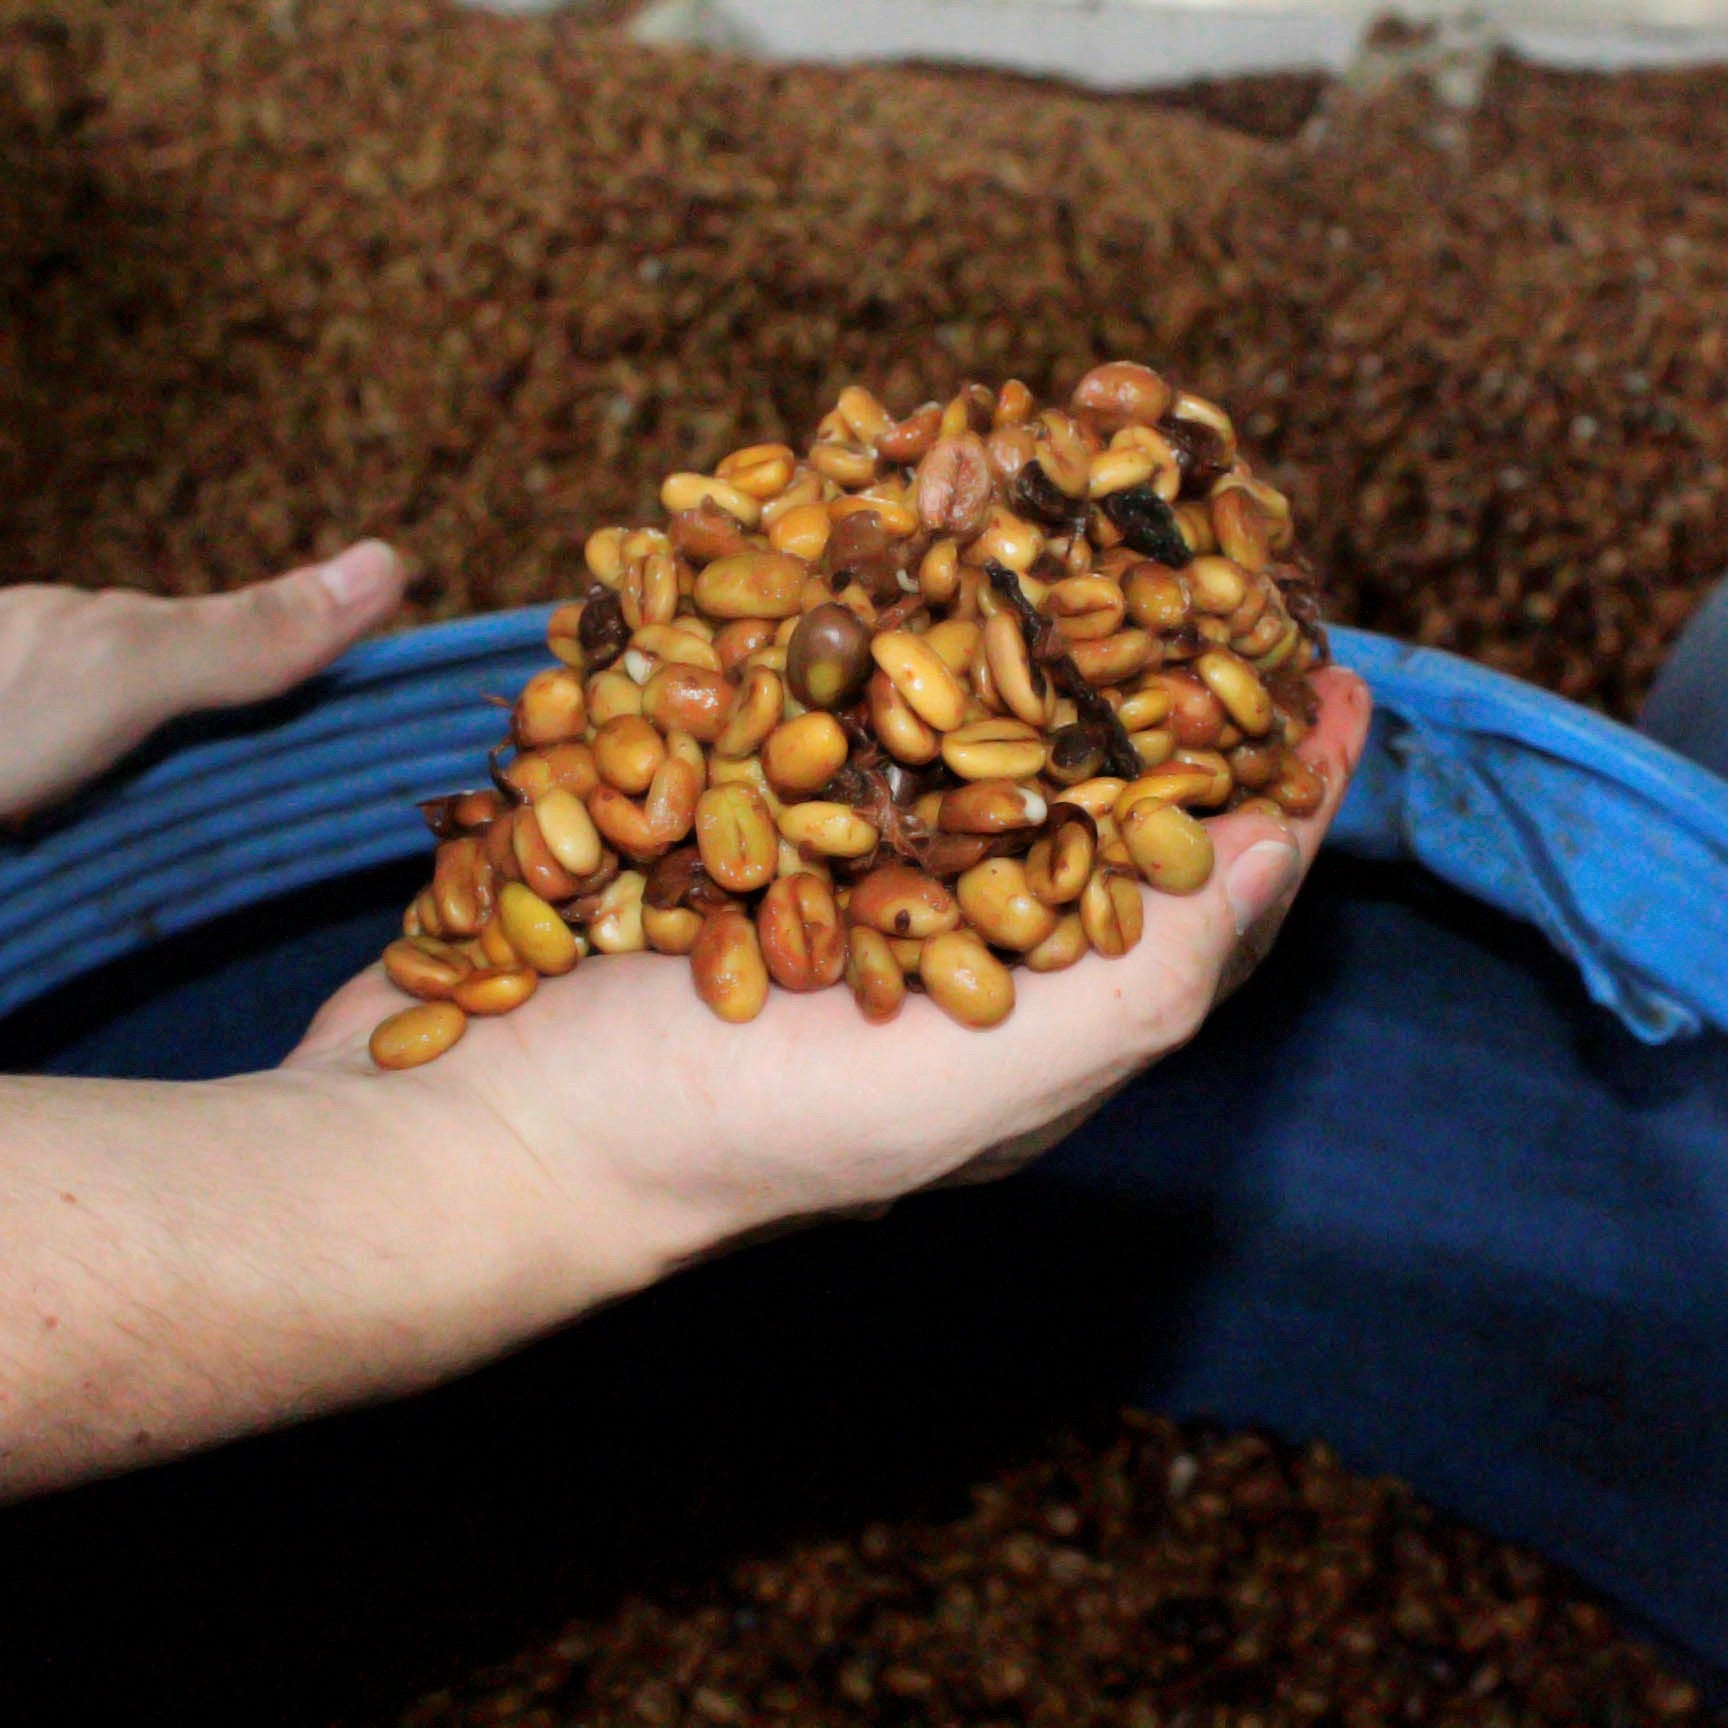 Coffee cherries during processing